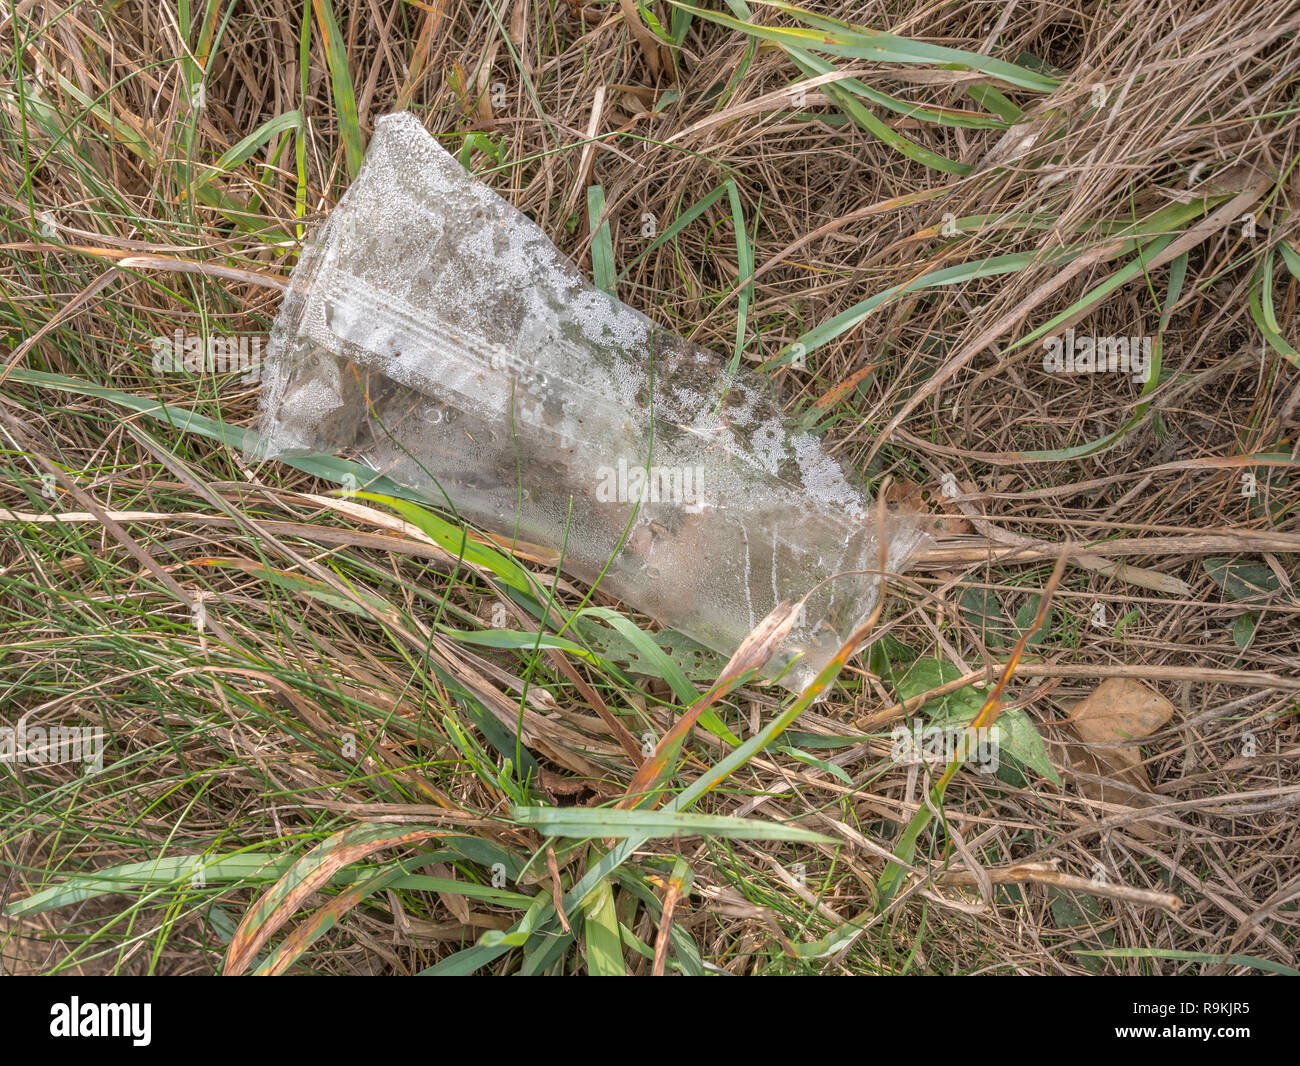 Soft plastic food wrapper discarded in rural hedgerow ditch. For plastic pollution, environmental pollution, war on plastic waste, plastic rubbish. Stock Photo